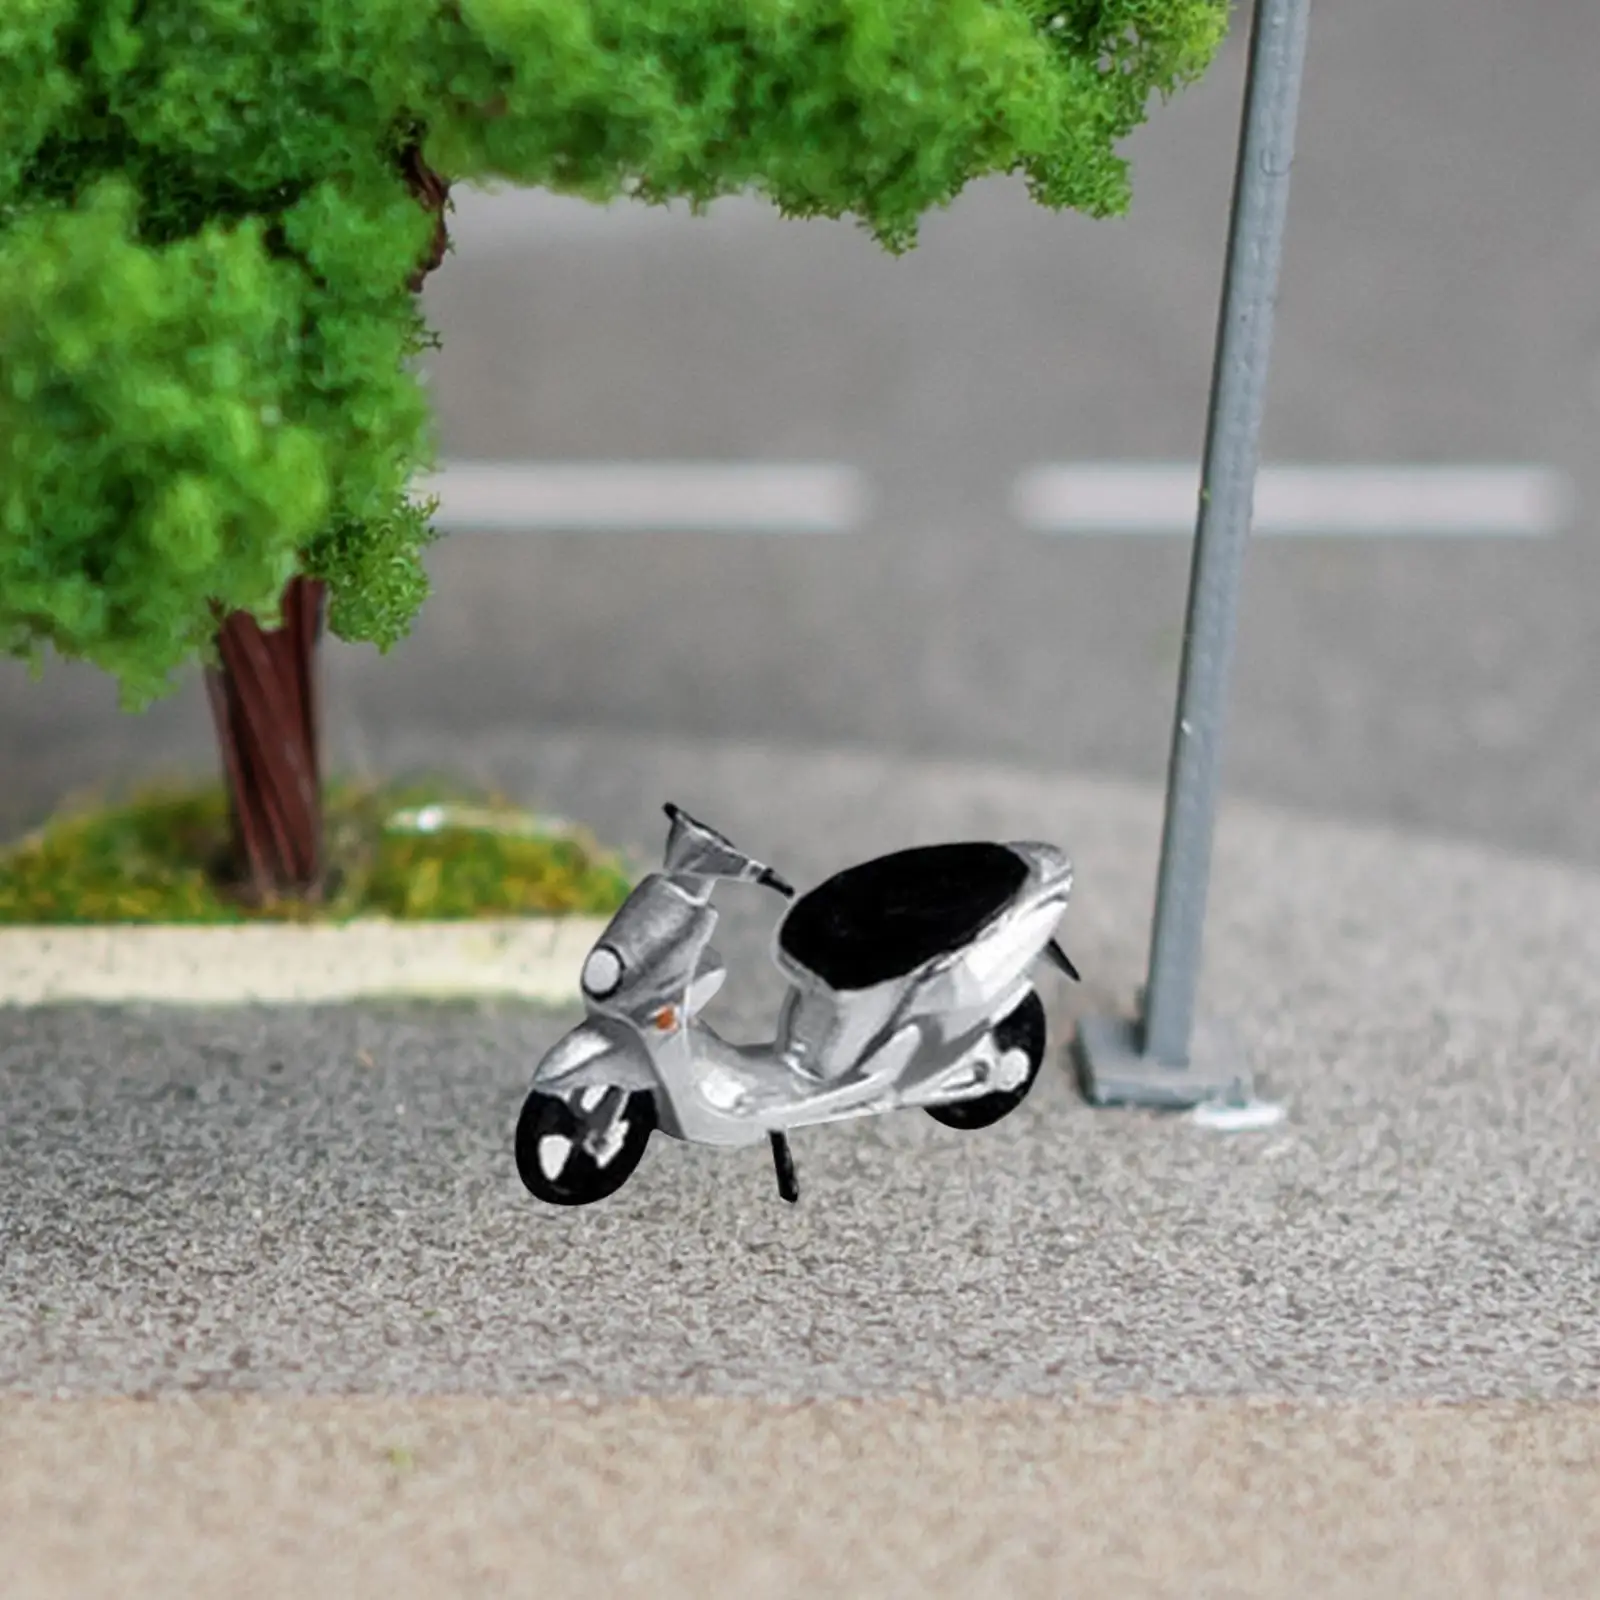 1:64 Diorama Street Motorcycle Model Realistic Motorcycle Toys for Dollhouse Photography Props Miniature Scene Accessories Decor